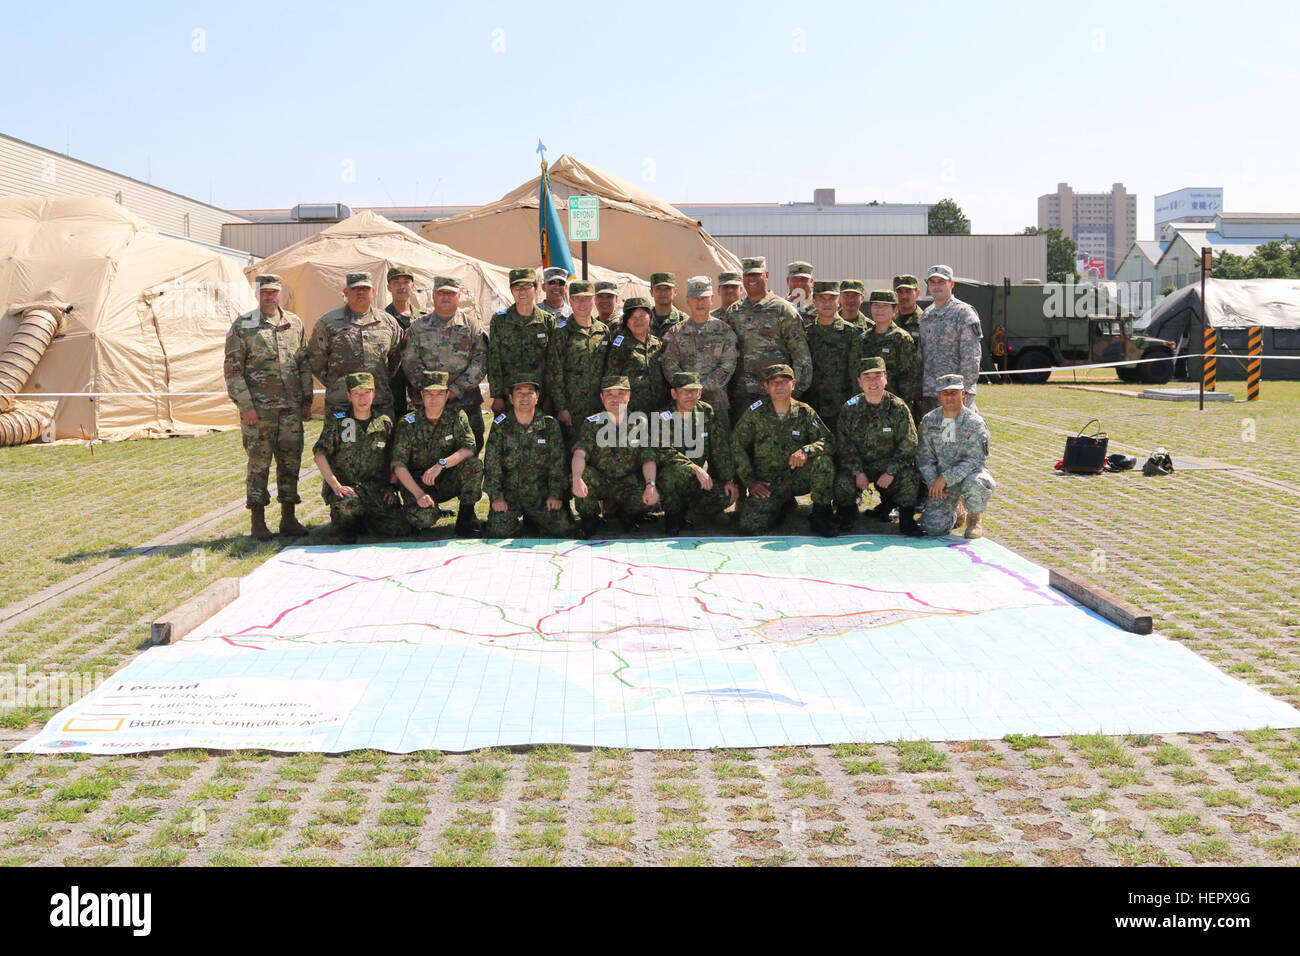 U.S. and Japan Ground Self-Defense Force (JGSDF) service members pose for a photo behind a 30 by 30 feet map outside Sagamihara Depot Mission Training Complex during a visit from Brig. Gen. Stephen K. Curda, Commander, 9th Mission Support Command, and exercise Imua Dawn 2016, Sagamihara, Japan, June 18, 2016.  Imua Dawn 2016 provides opportunities for U.S. and Japanese forces to come together and train for potential real world events, better preparing them in supporting regional populations in all Humanitarian Assistance and Disaster Relief (HADR) and Noncombatant Evacuation Operations (NEO).  Stock Photo